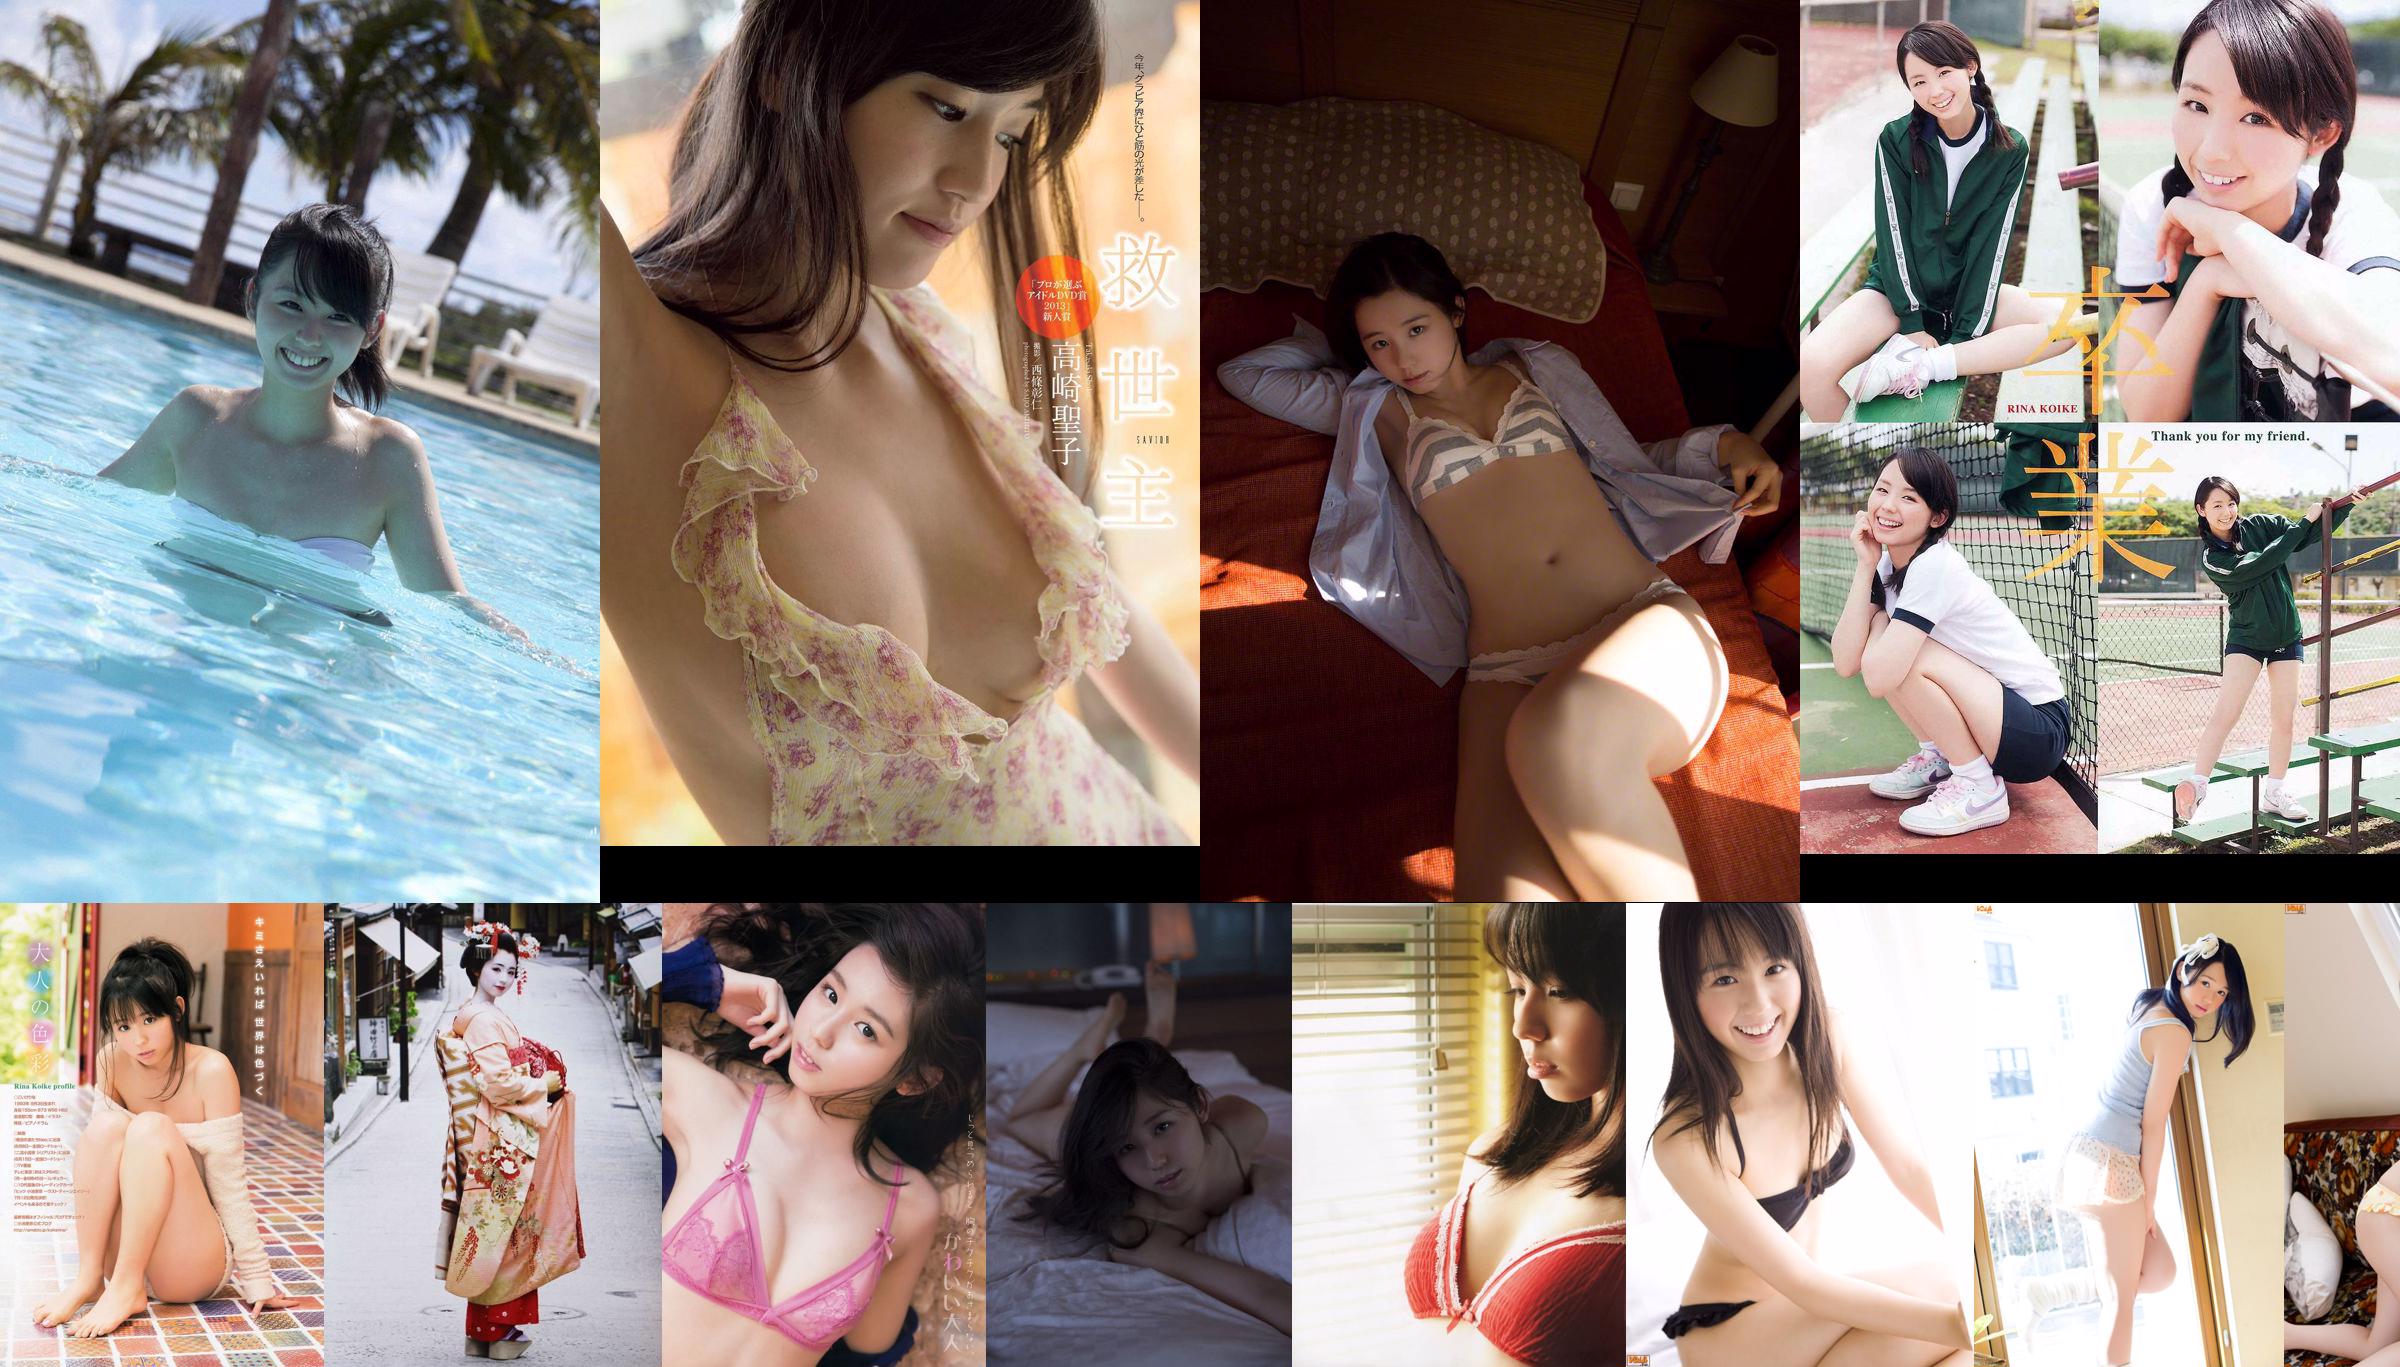 [Bomb.TV] April 2012 Issue Rina Koike No.6bedf4 Page 7